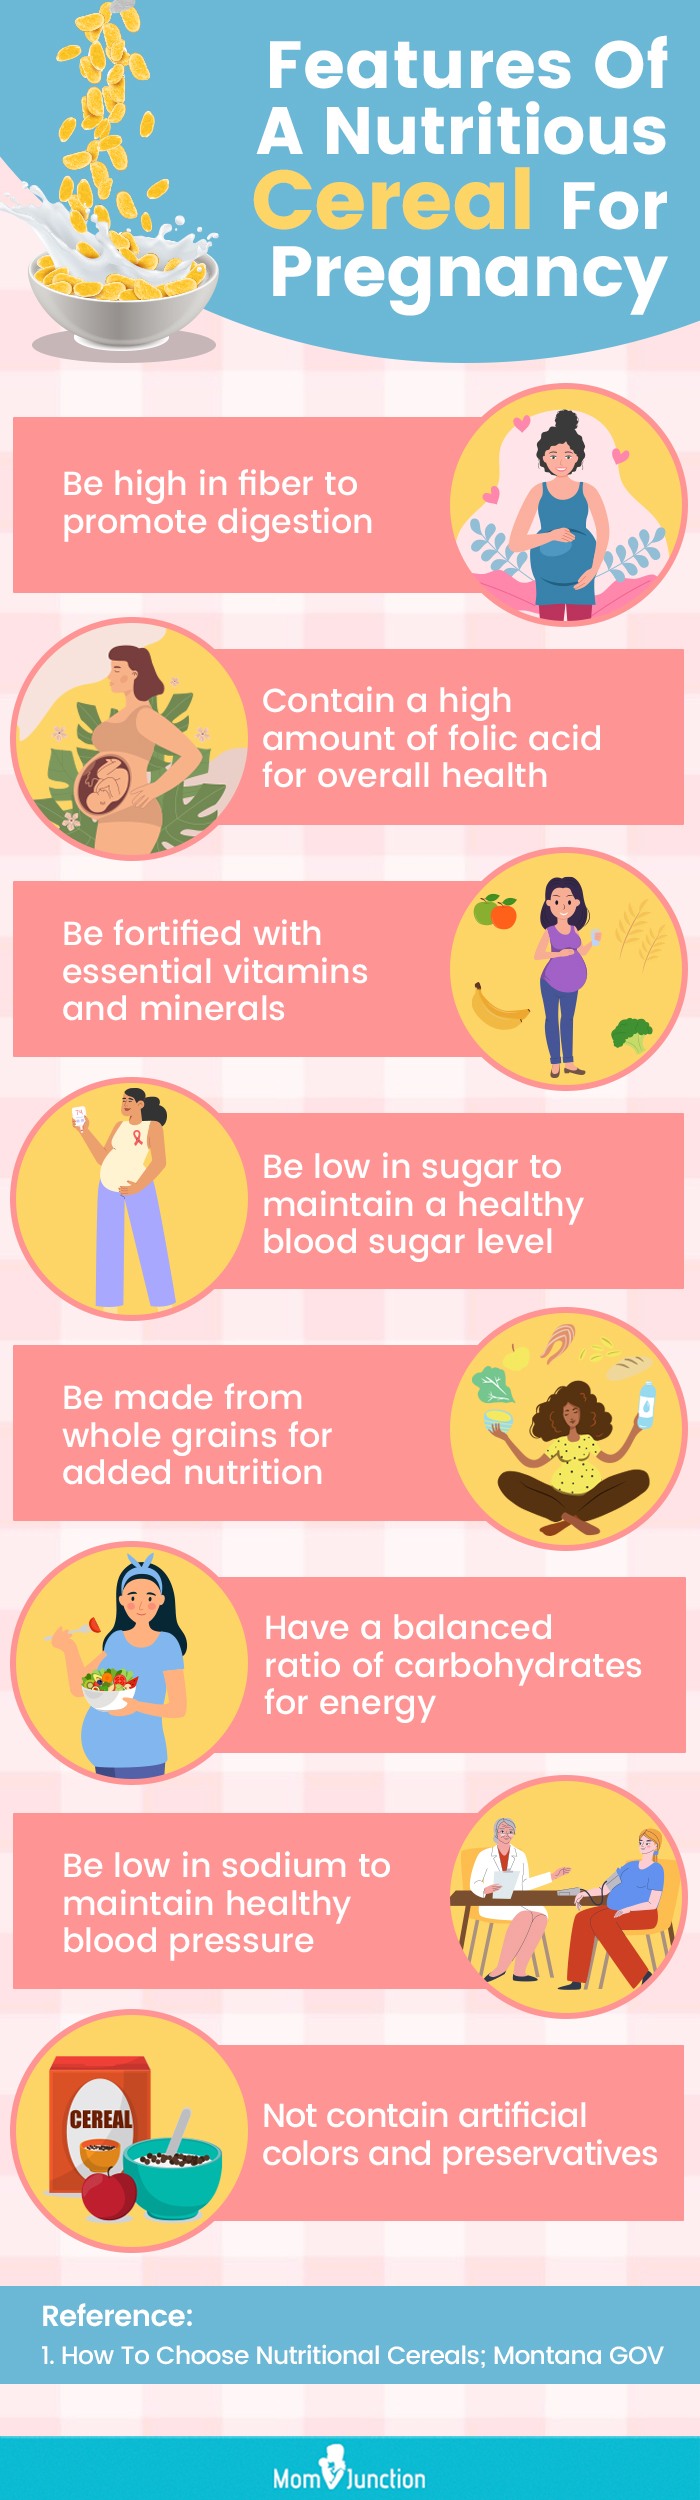 features of a nutritious cereal for pregnancy (infographic)